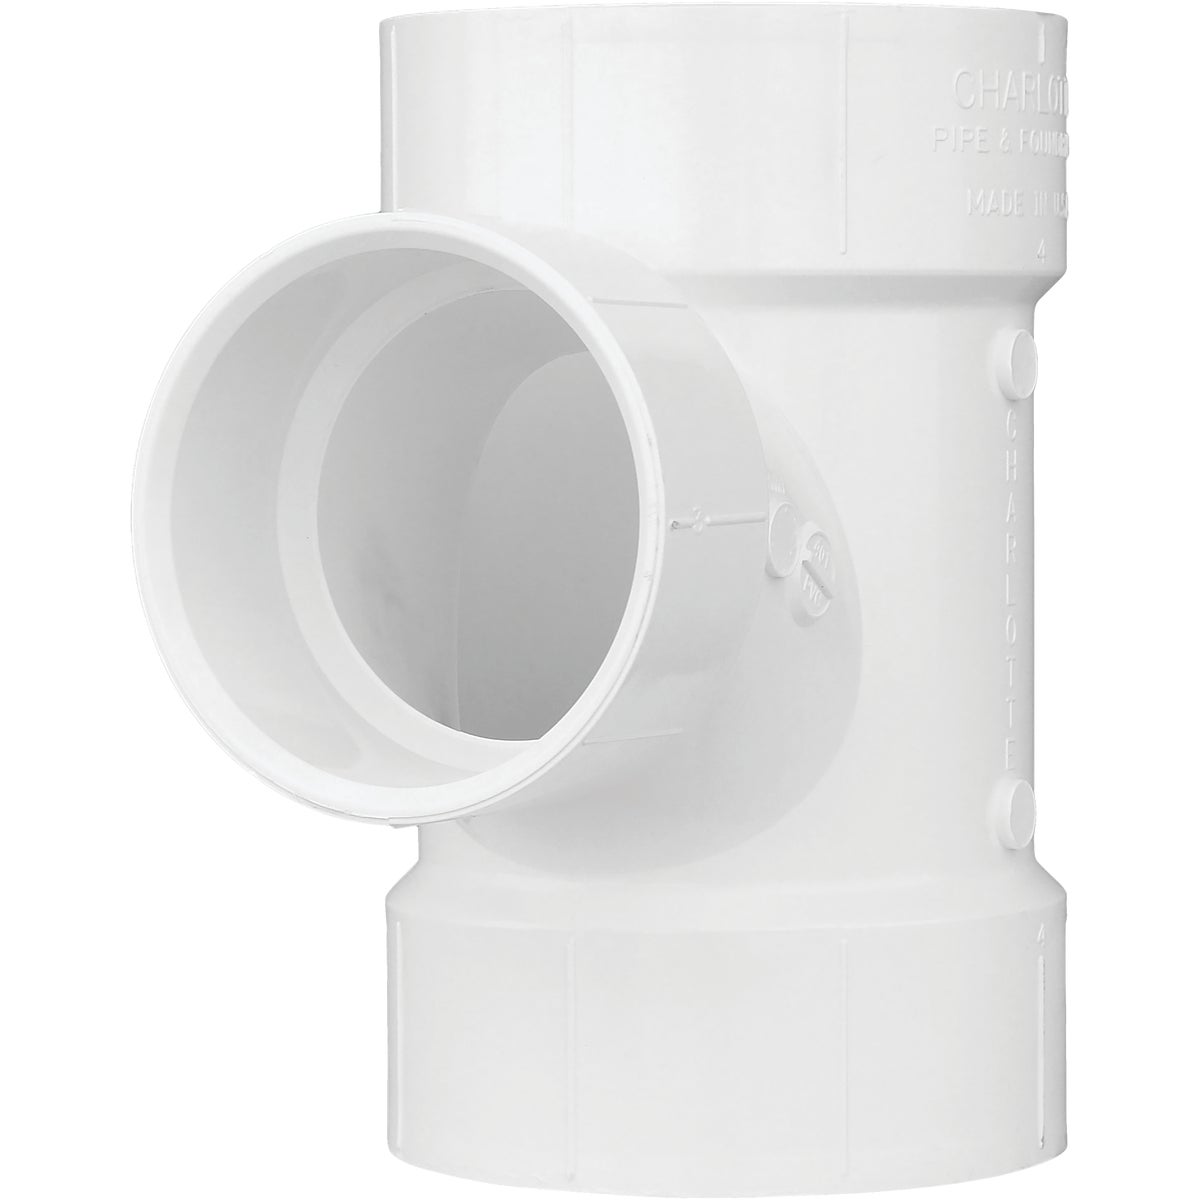 Charlotte Pipe 3 In. Sch 30 x 1-1/2 Sch 40 Reducing Sanitary PVC Tee